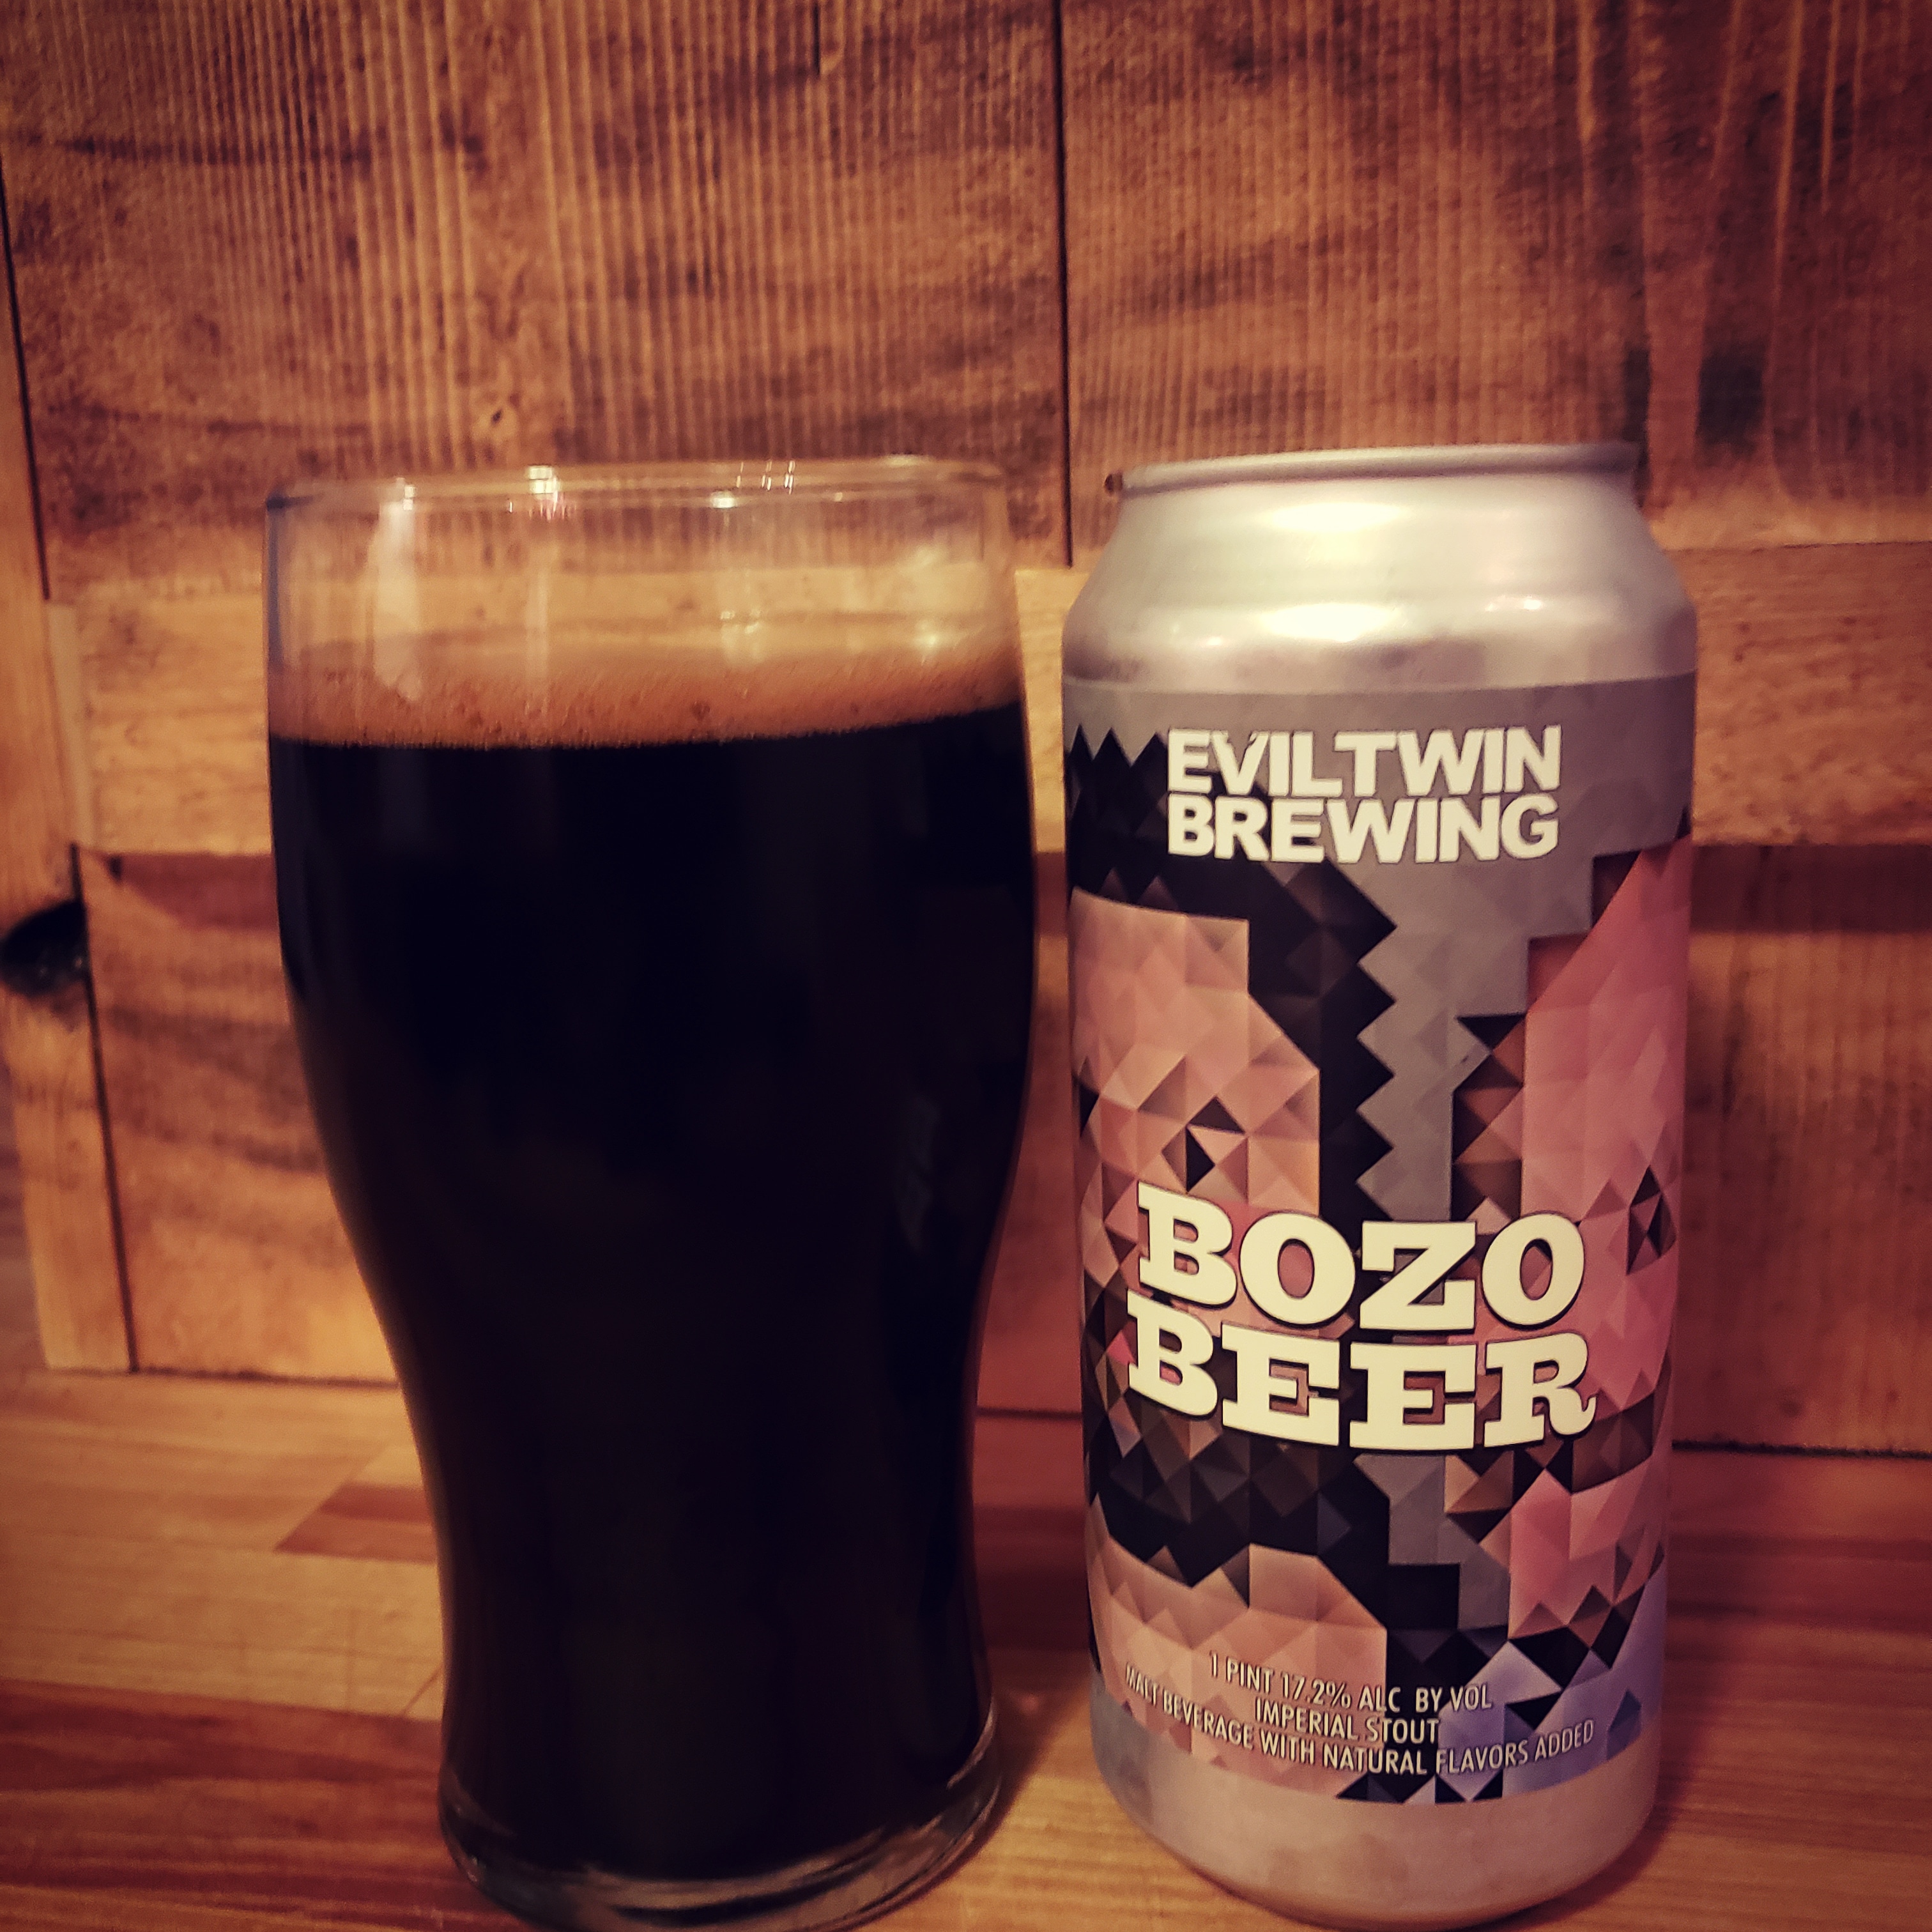 Bozo Beer by Evil Twin